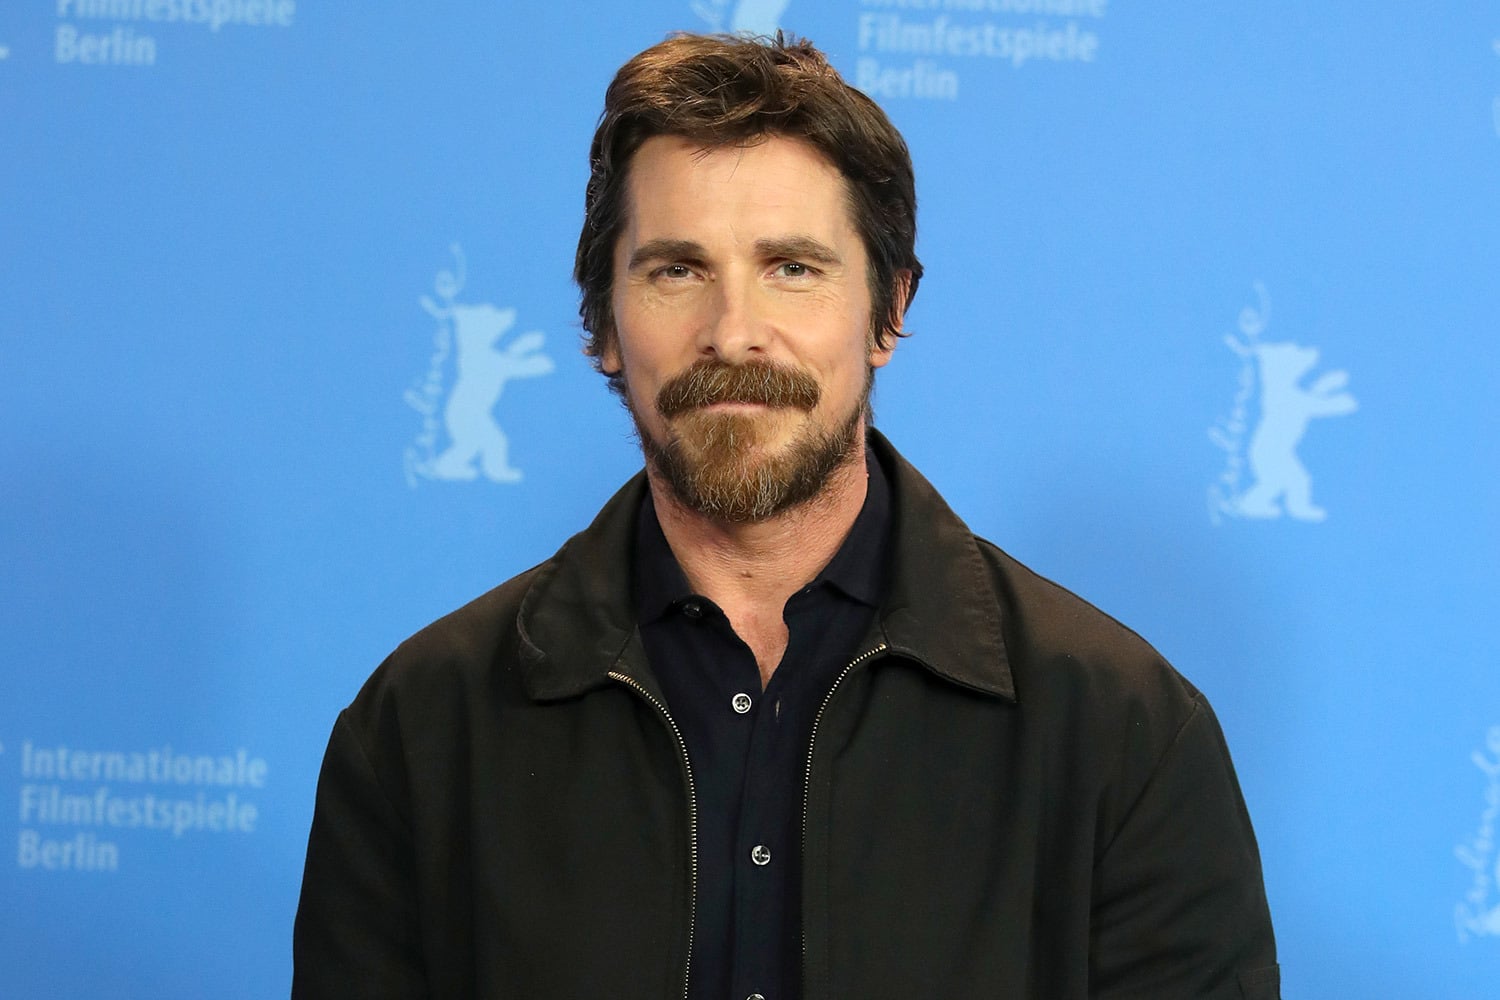 Christian Bale's 'Thor: Love and Thunder' Role Revealed | The Cinema Spot